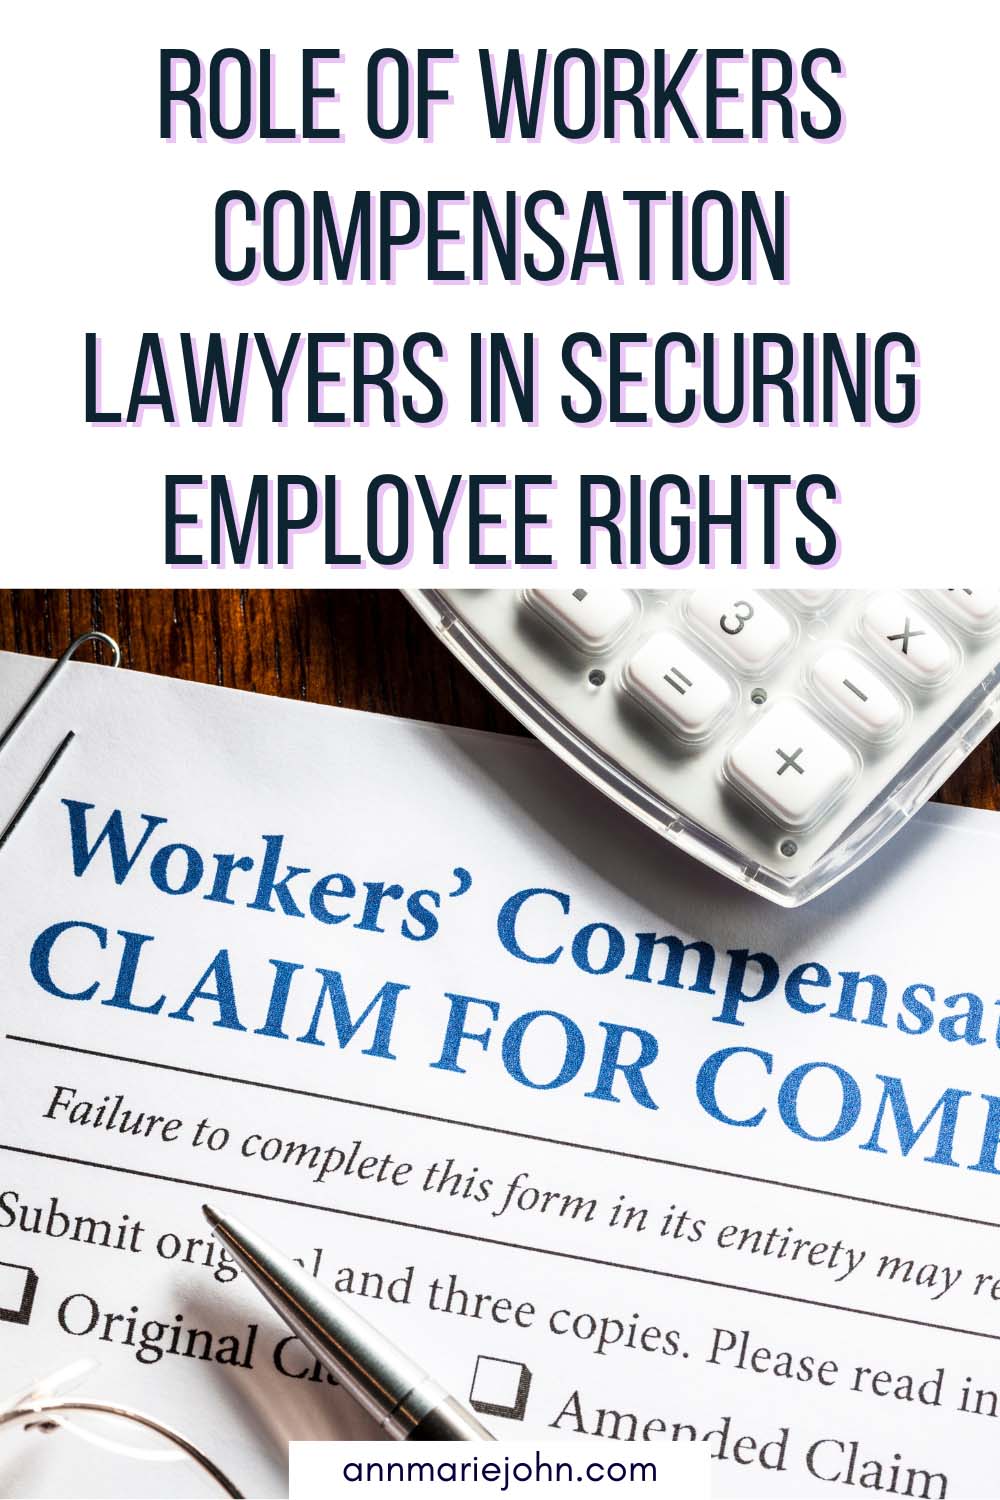 Role of Workers Compensation Lawyers in Securing Employee Rights